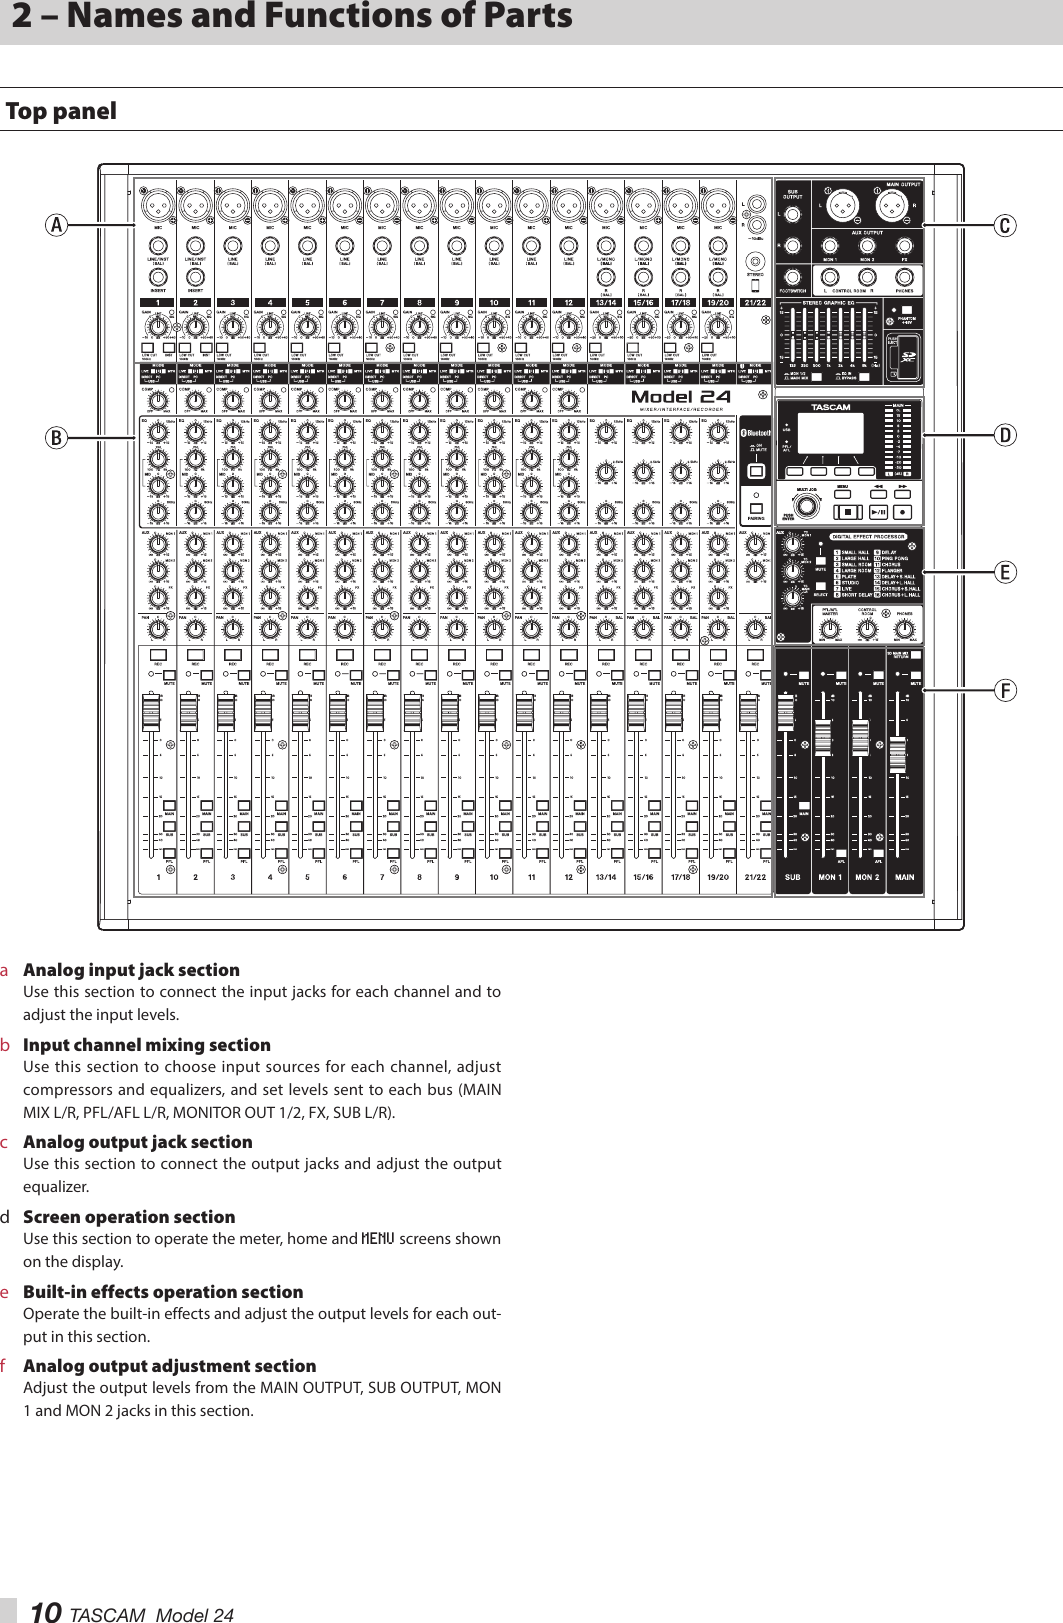 10 TASCAM  Model 242 – Names and Functions of PartsTop panela  Analog input jack sectionUse this section to connect the input jacks for each channel and to adjust the input levels.b Input channel mixing sectionUse this section to choose input sources for each channel, adjust compressors and equalizers, and set levels sent to each bus (MAIN MIX L/R, PFL/AFL L/R, MONITOR OUT 1/2, FX, SUB L/R).c  Analog output jack sectionUse this section to connect the output jacks and adjust the output equalizer.d  Screen operation sectionUse this section to operate the meter, home and MENU screens shown on the display.e  Built-in effects operation sectionOperate the built-in effects and adjust the output levels for each out-put in this section.f  Analog output adjustment sectionAdjust the output levels from the MAIN OUTPUT, SUB OUTPUT, MON 1 and MON 2 jacks in this section.